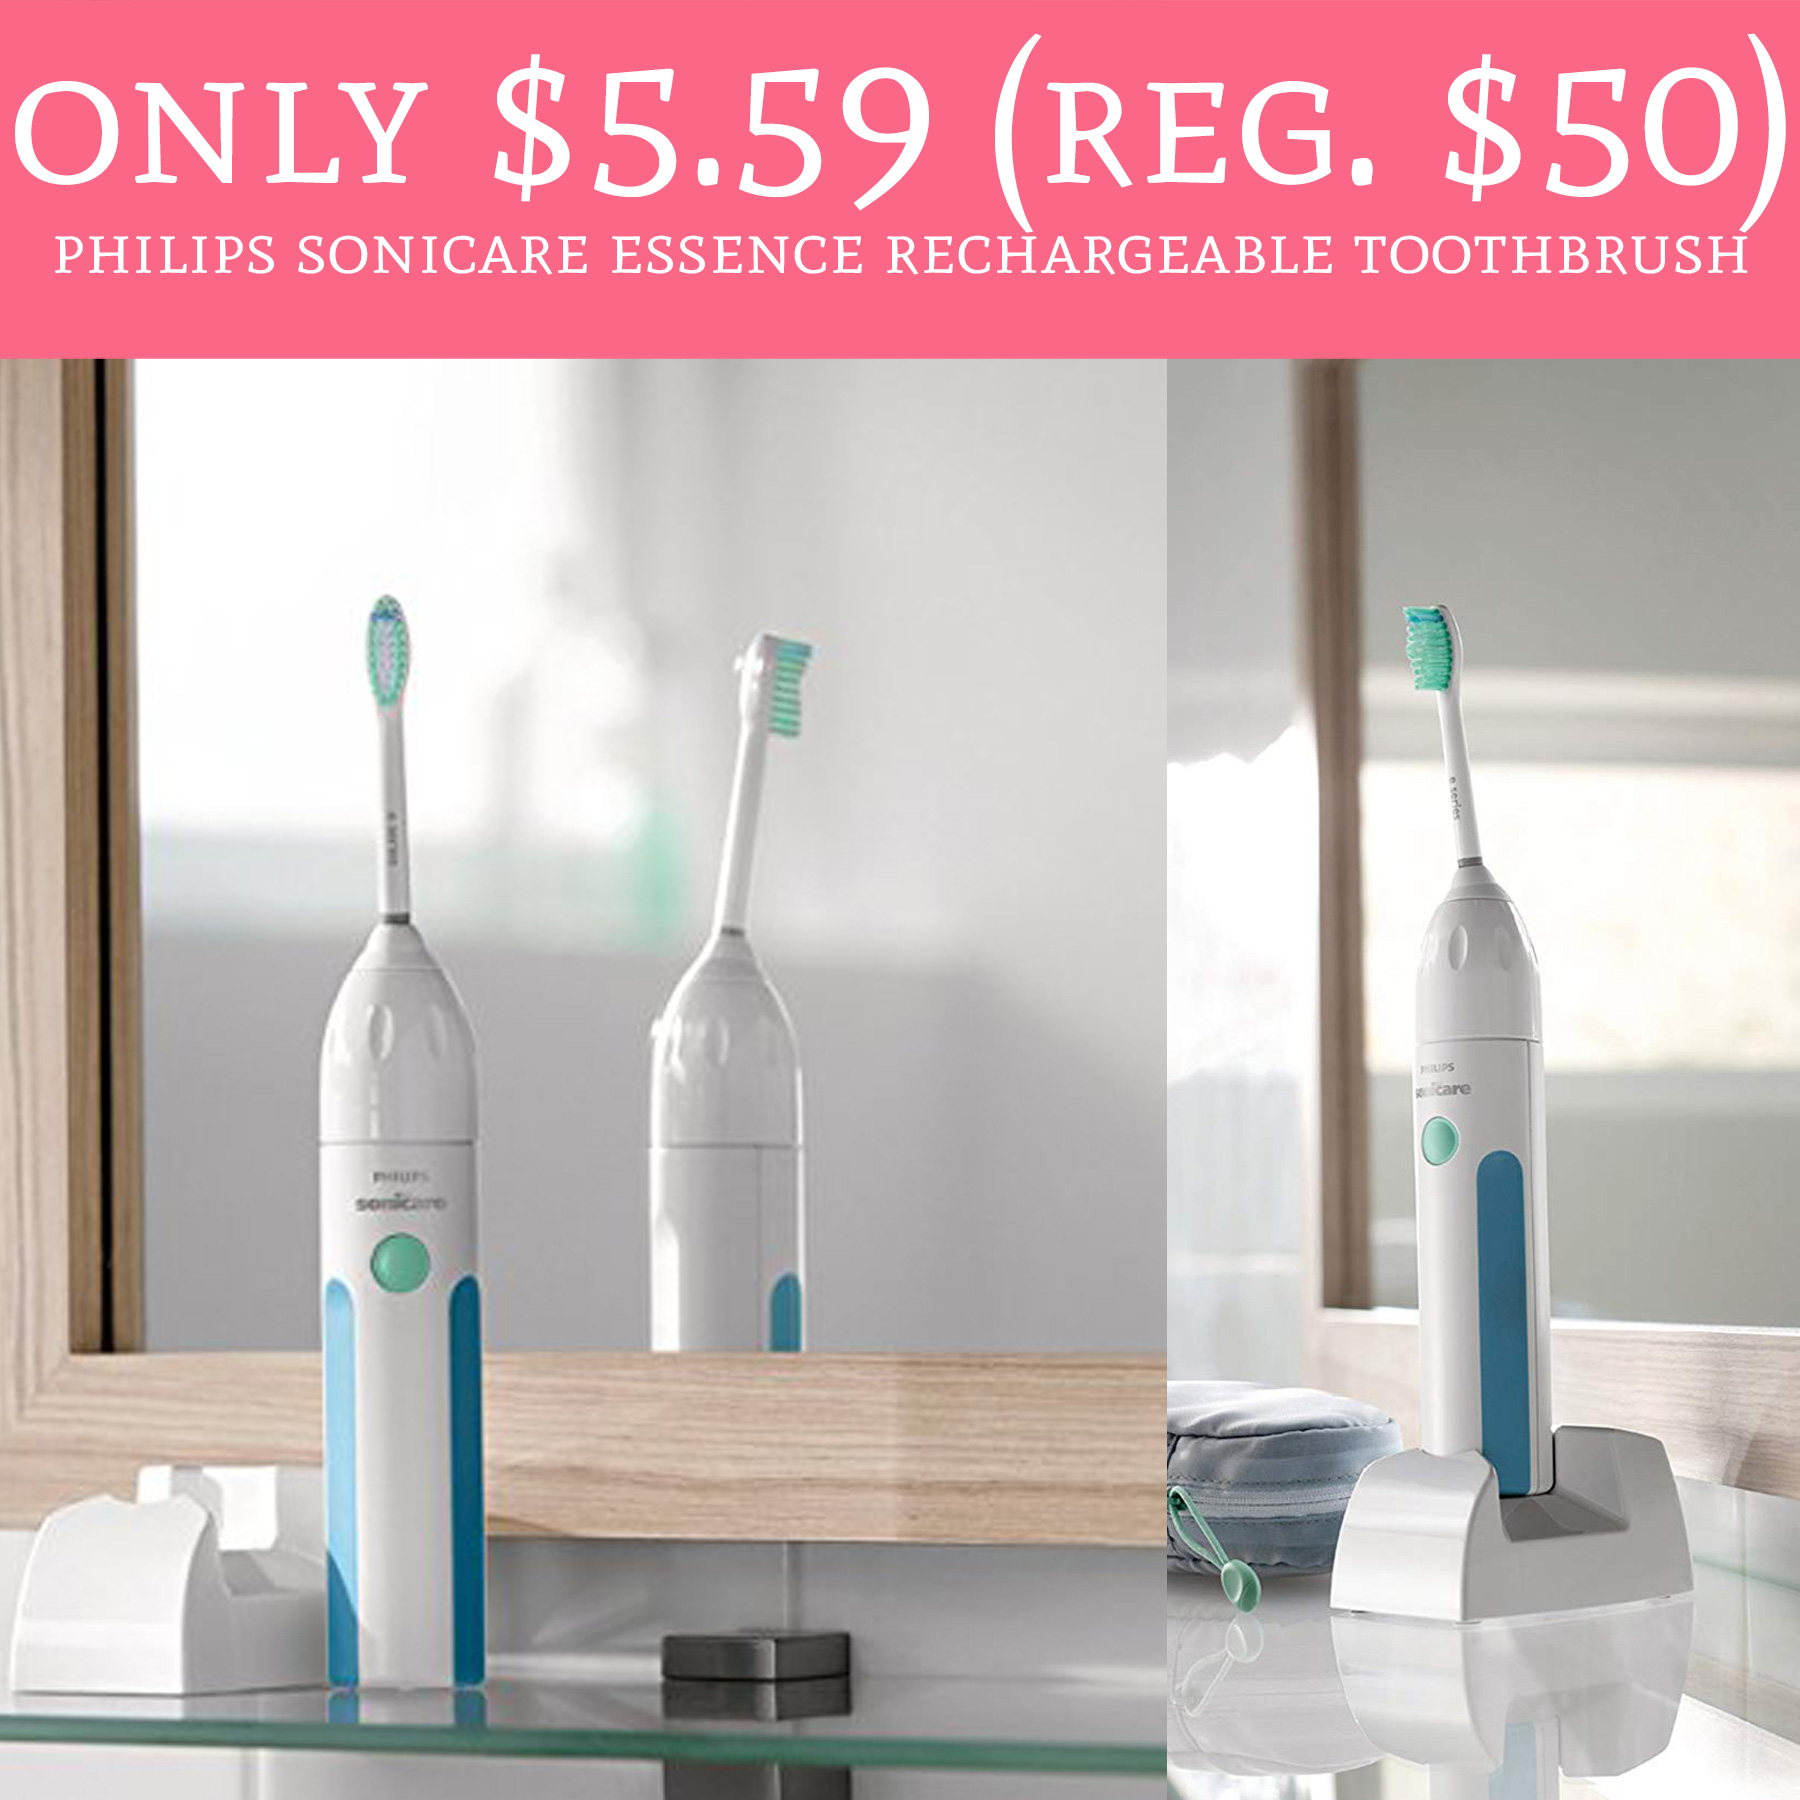 philips-sonicare-essence-rechargeable-toothbrush-1